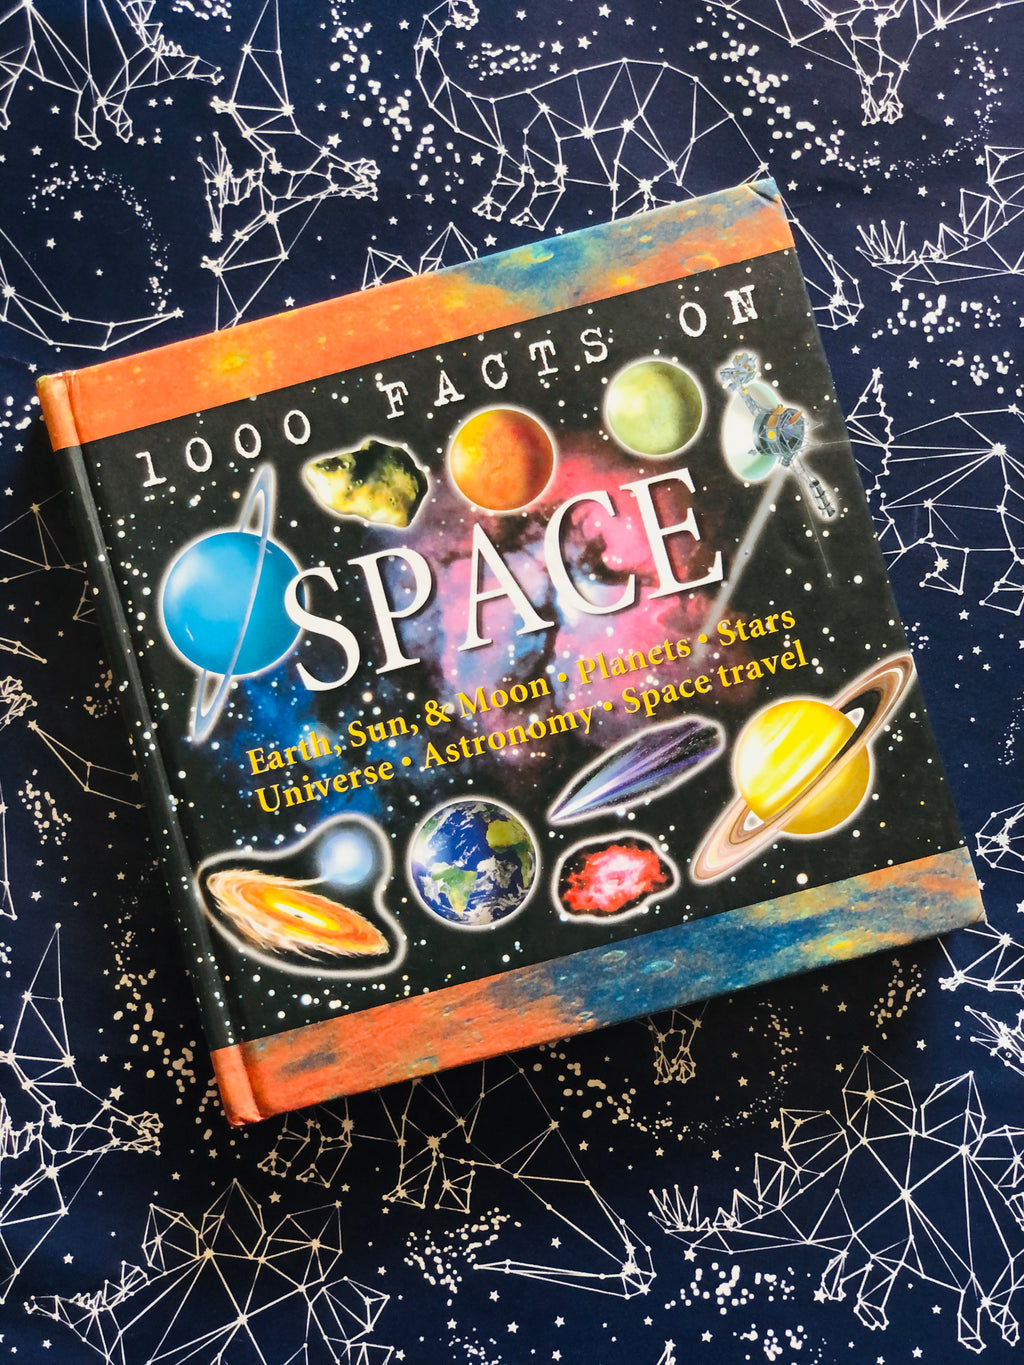 1000 Facts of Space